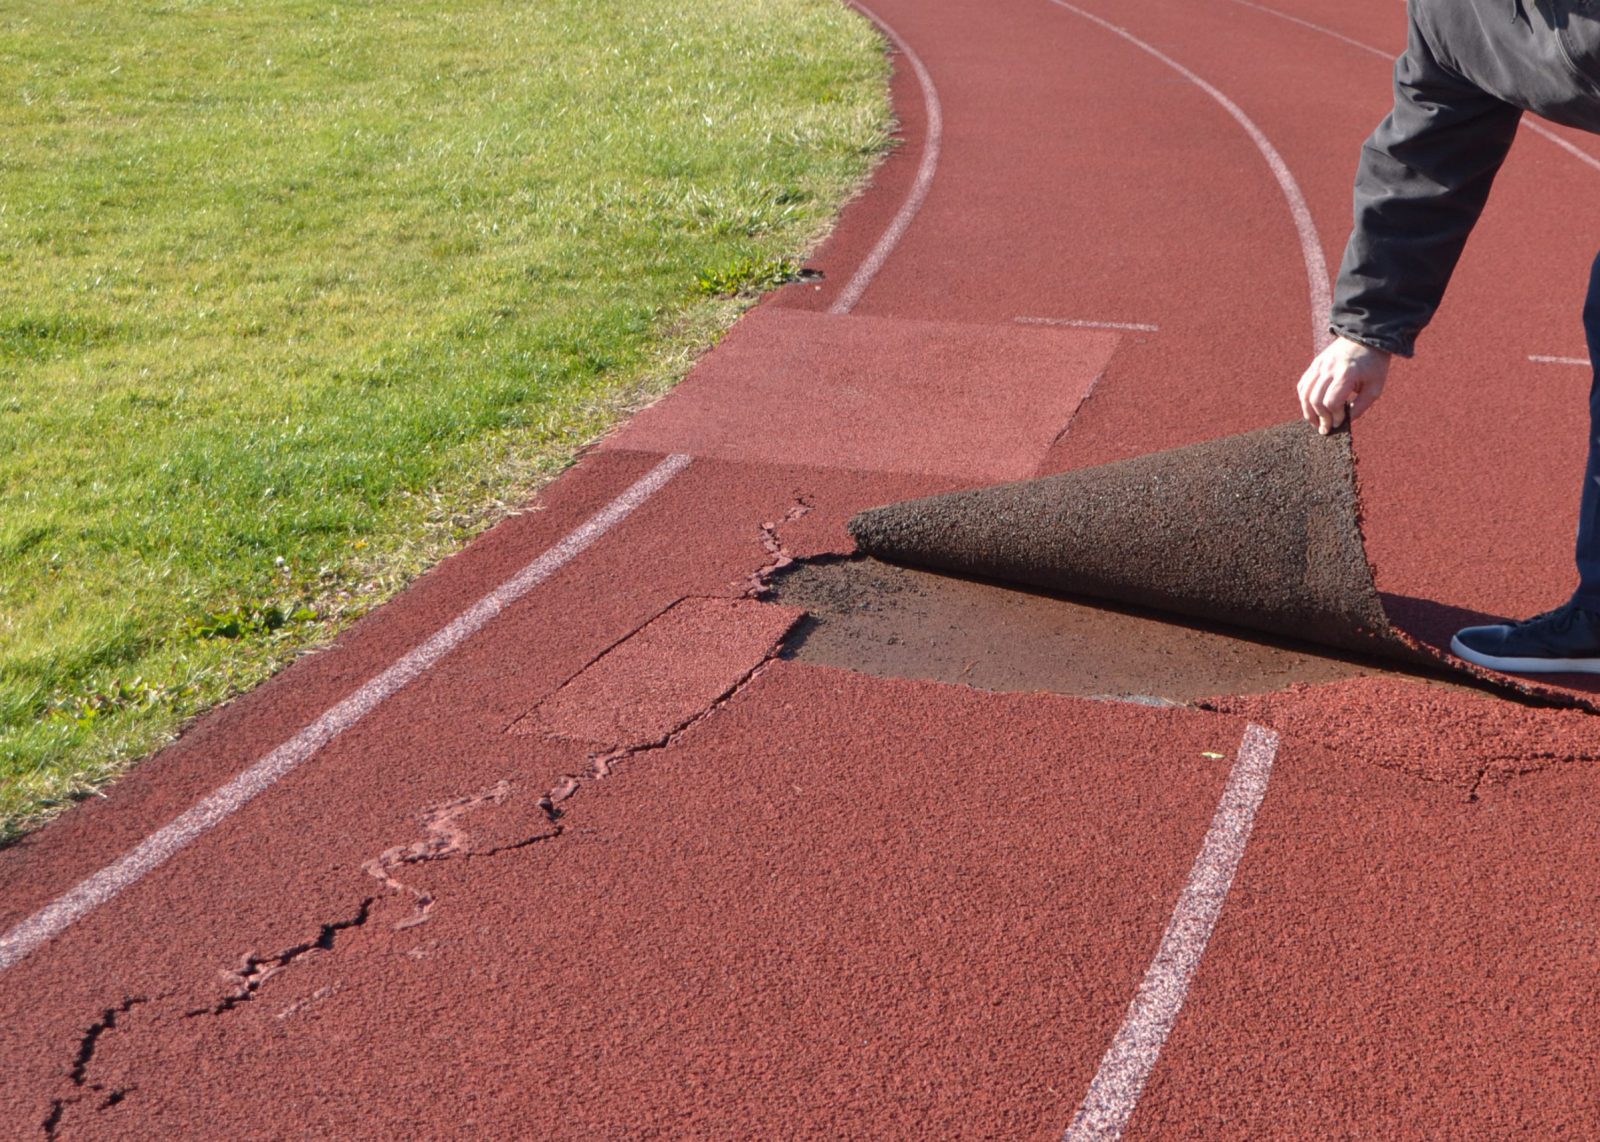 Image of the high school track with someone peeling up the top layer of it